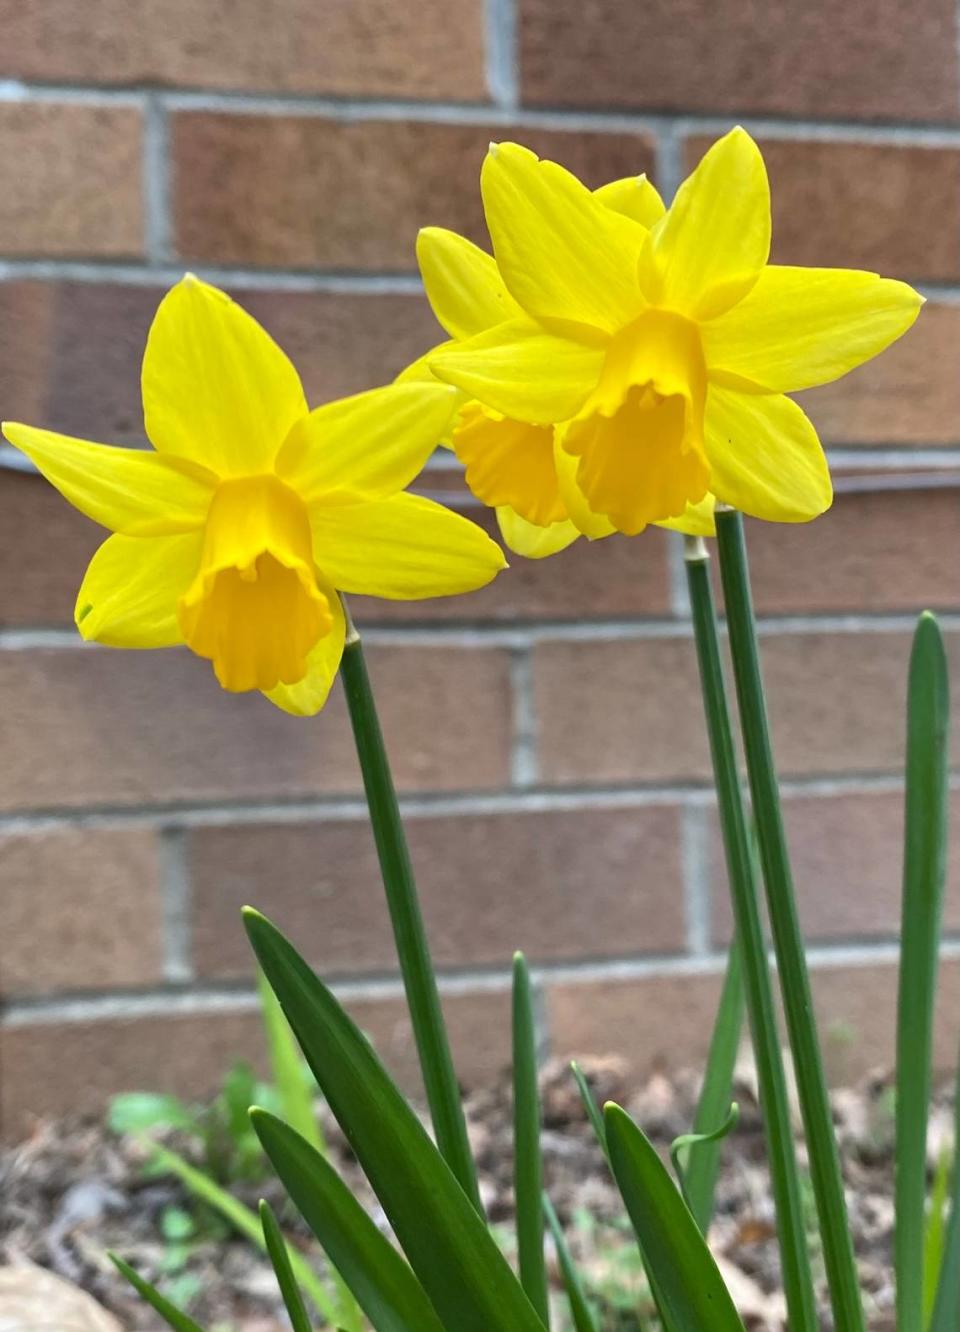 Daffodils will return year after year if you allow the green leaves to mature and yellow after the flowers fade. The bulbs must be allowed to go dormant to fuel the flower growth the following year.